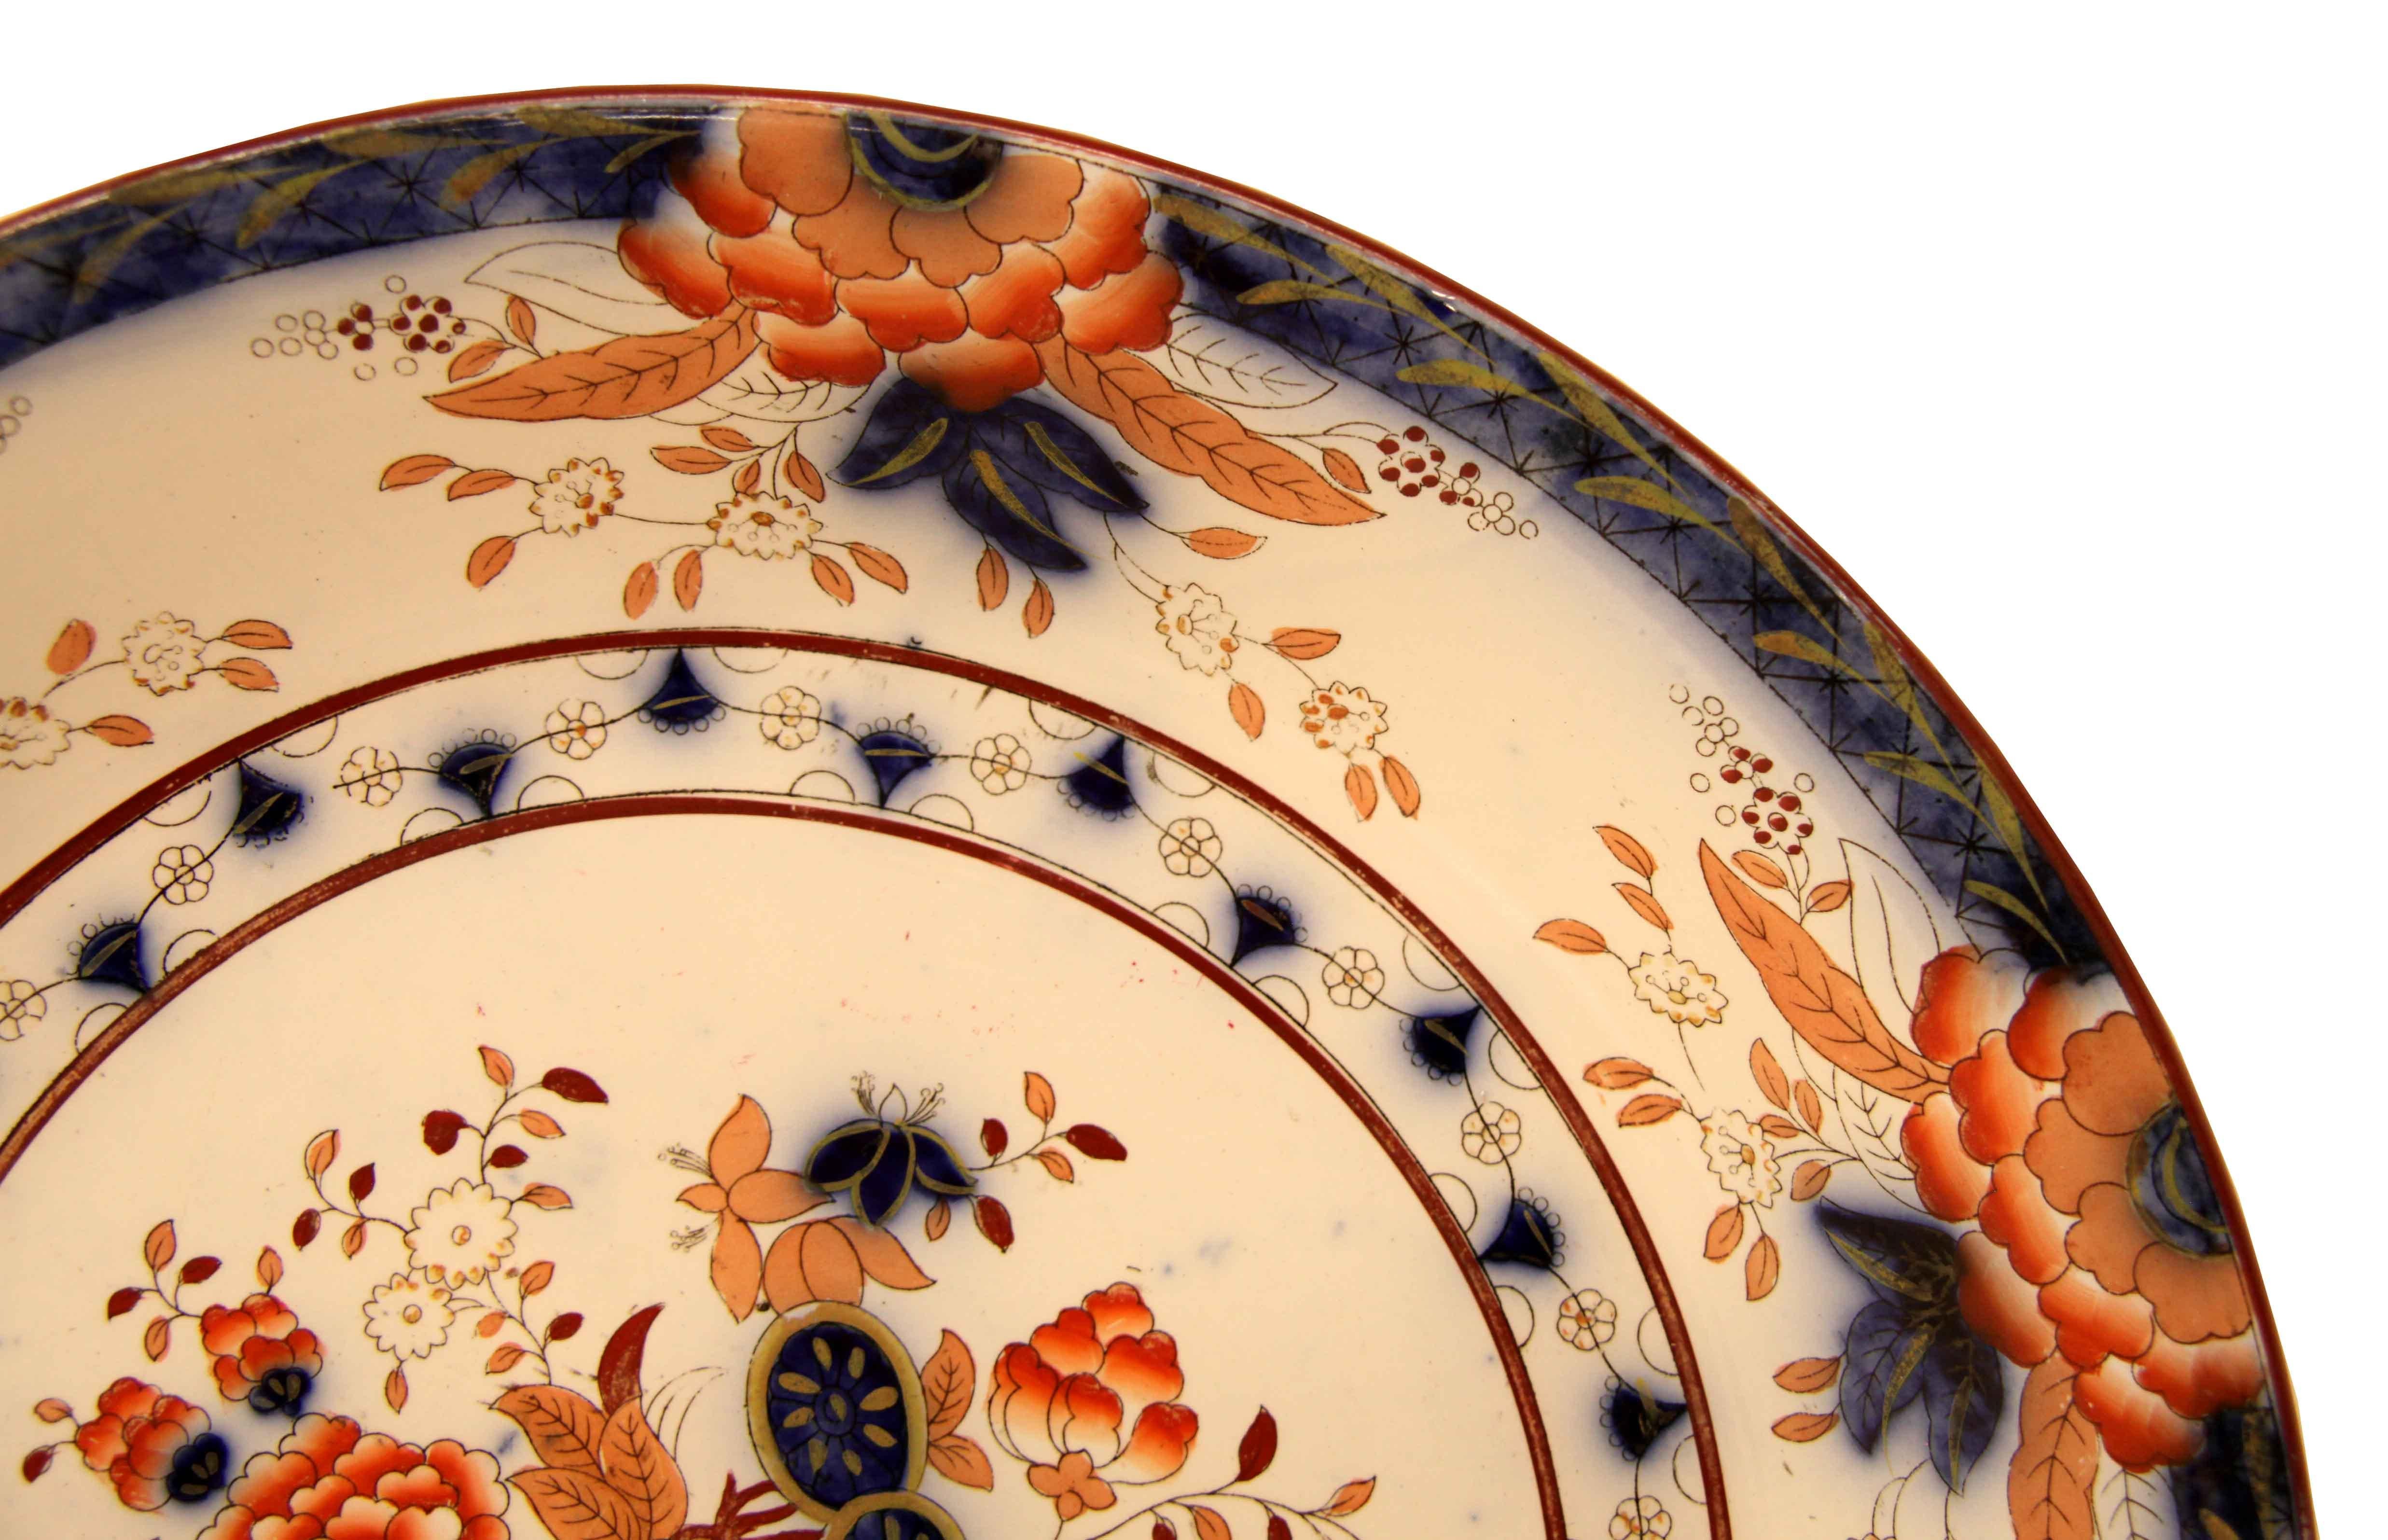 Dutch P. Regout charger,, the outer edge has a flow blue background with foliate , this is separated a repeated design of various stylized flowers and foliate in shades of orange, coral, tan, and flow blue.  The center features a flow blue urn with